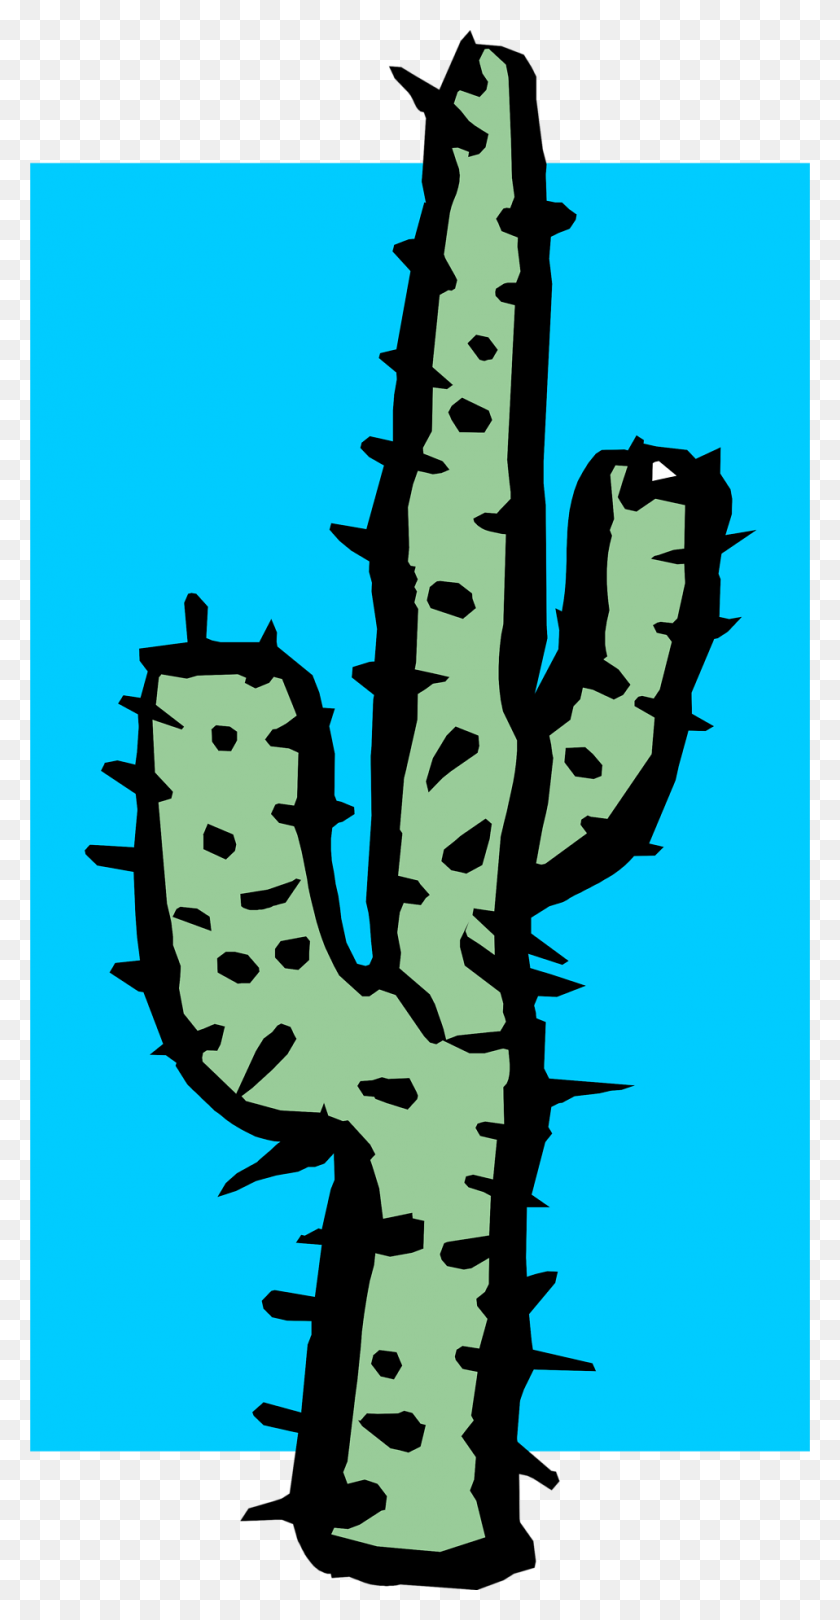 958x1916 Cactus Free Stock Photo Illustration Of A Tall Cactus - Cactus PNG Clipart